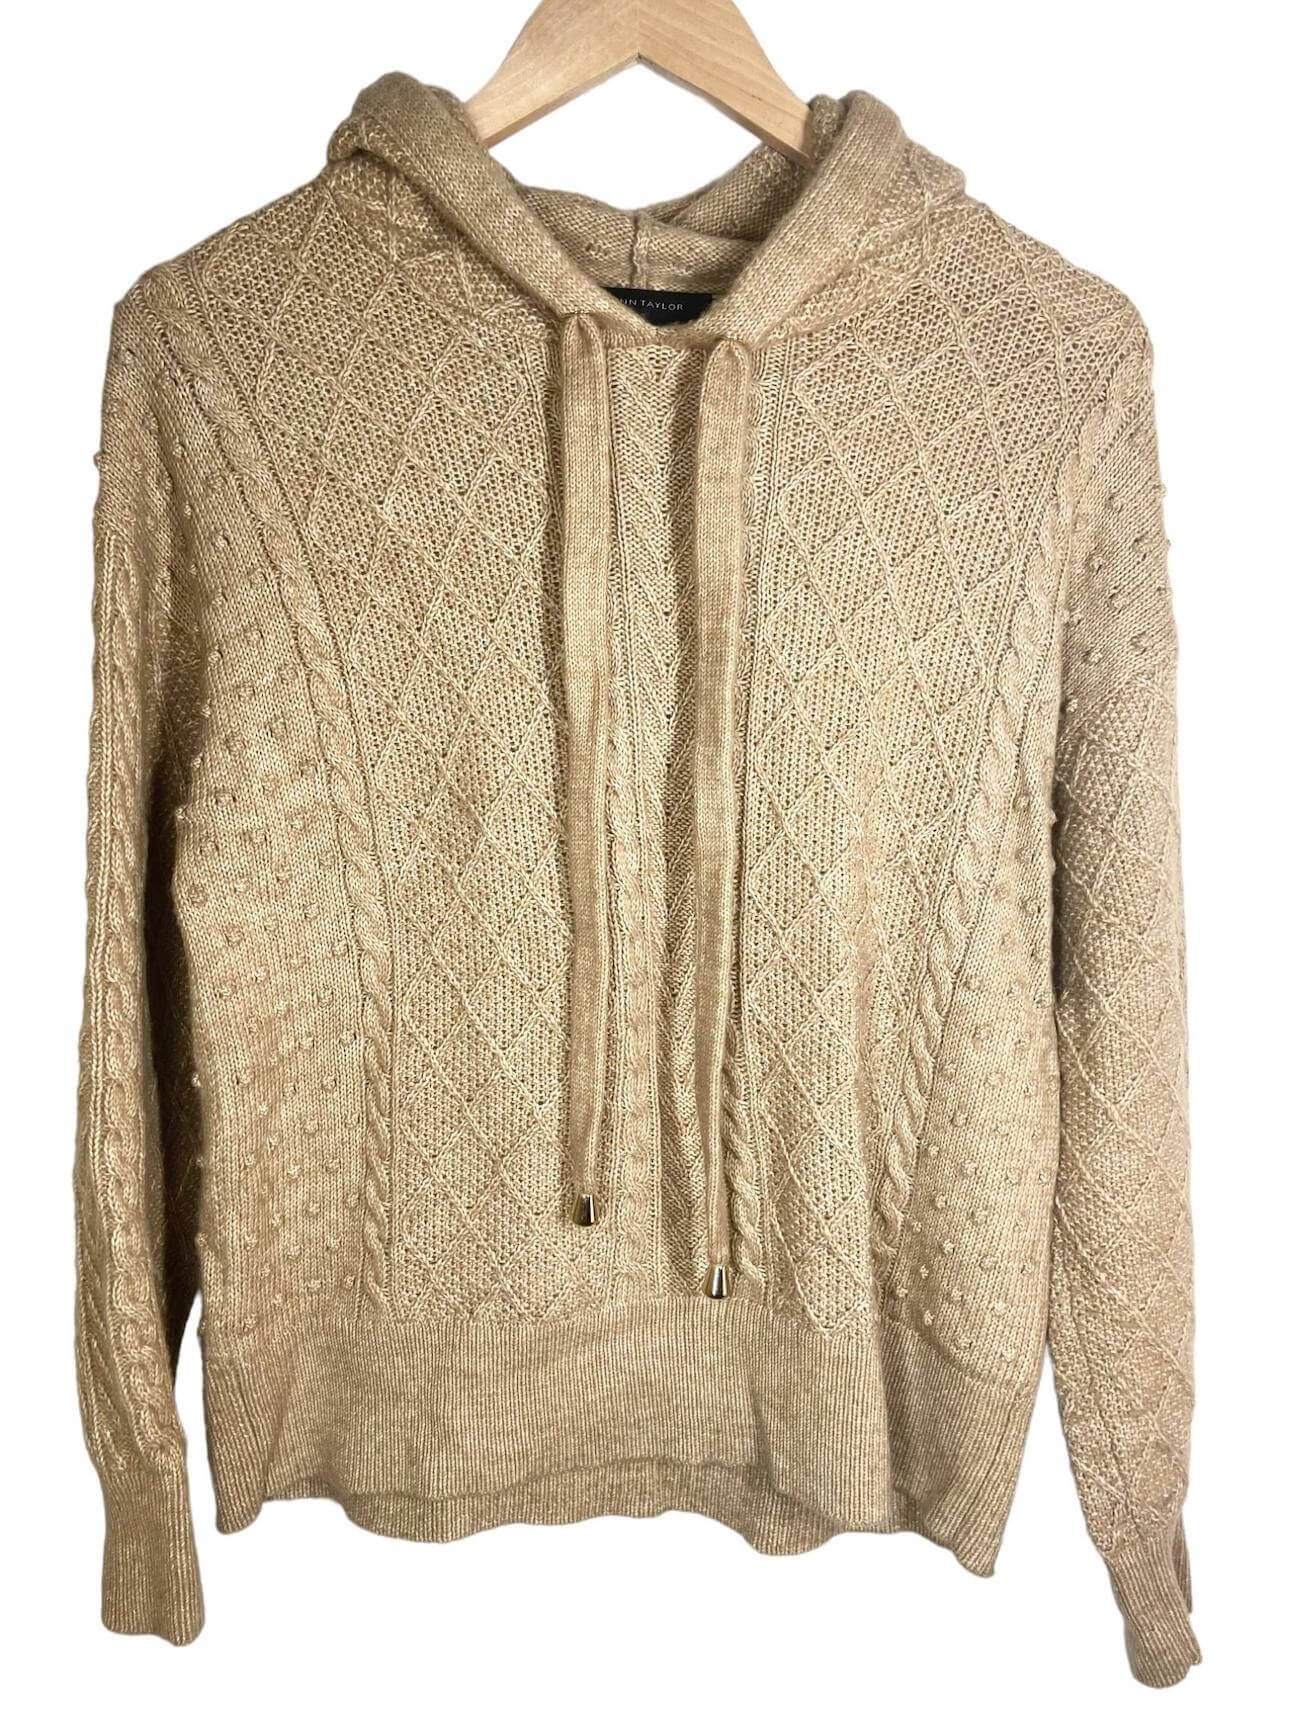 Light Spring ANN TAYLOR tan cable knit hooded sweater